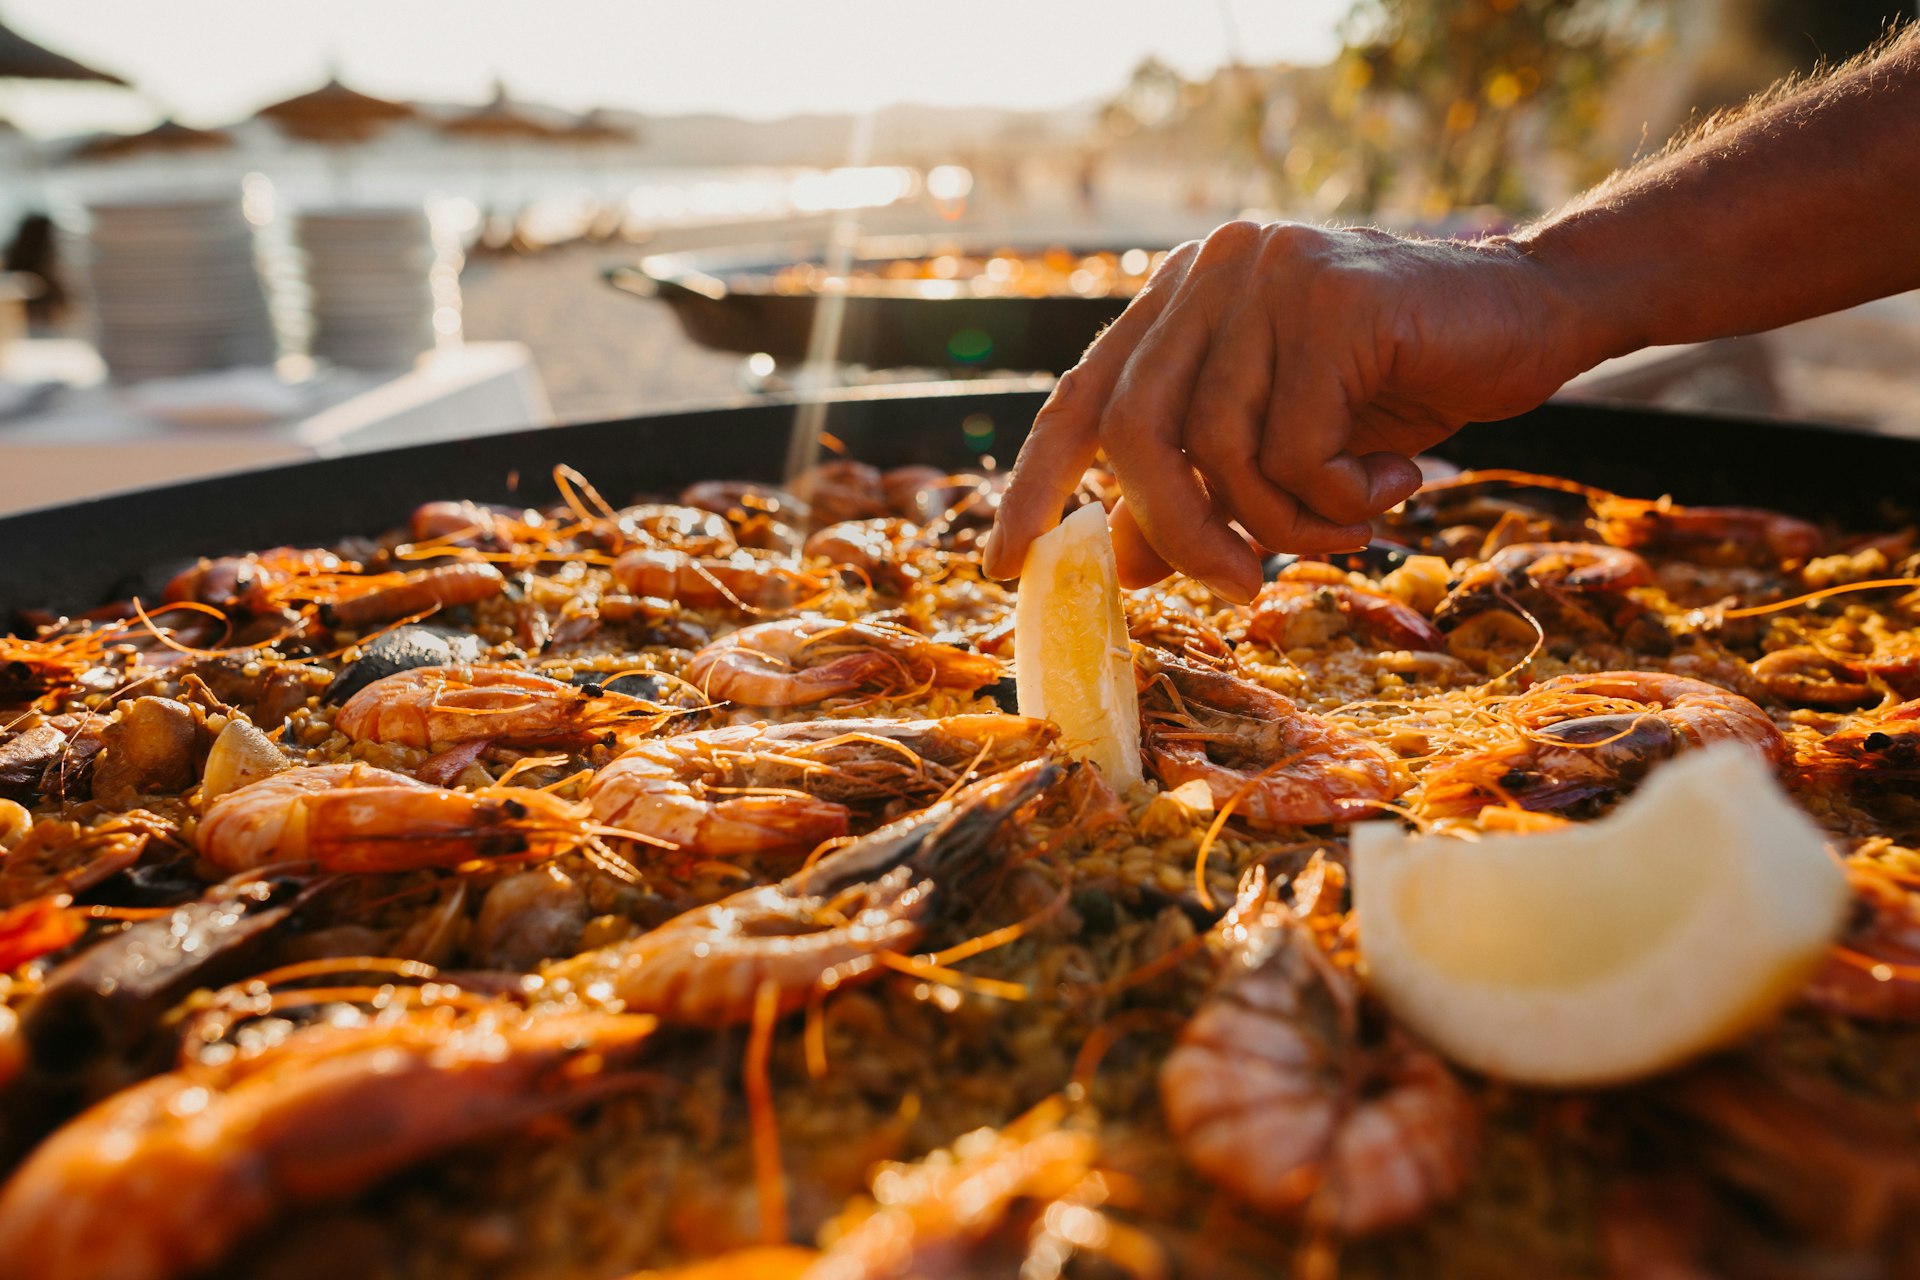 A hand reaches into a large flat pan full of rice and mussels as a paella dish is prepared